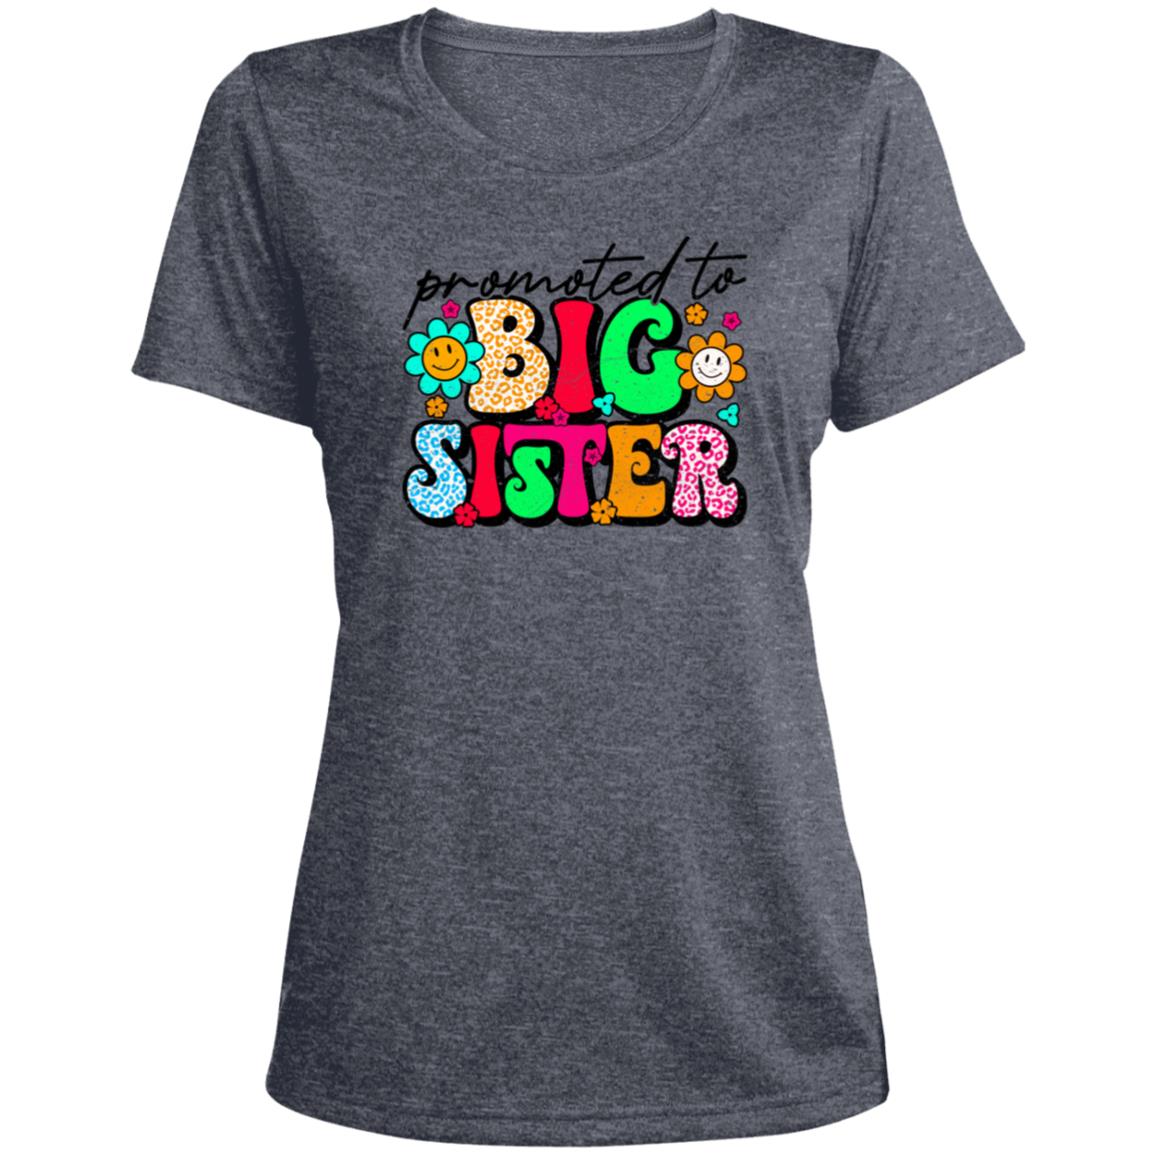 Promoted To Big Sister Short Sleeve Heather T-Shirt-TD Gift Solutions.com